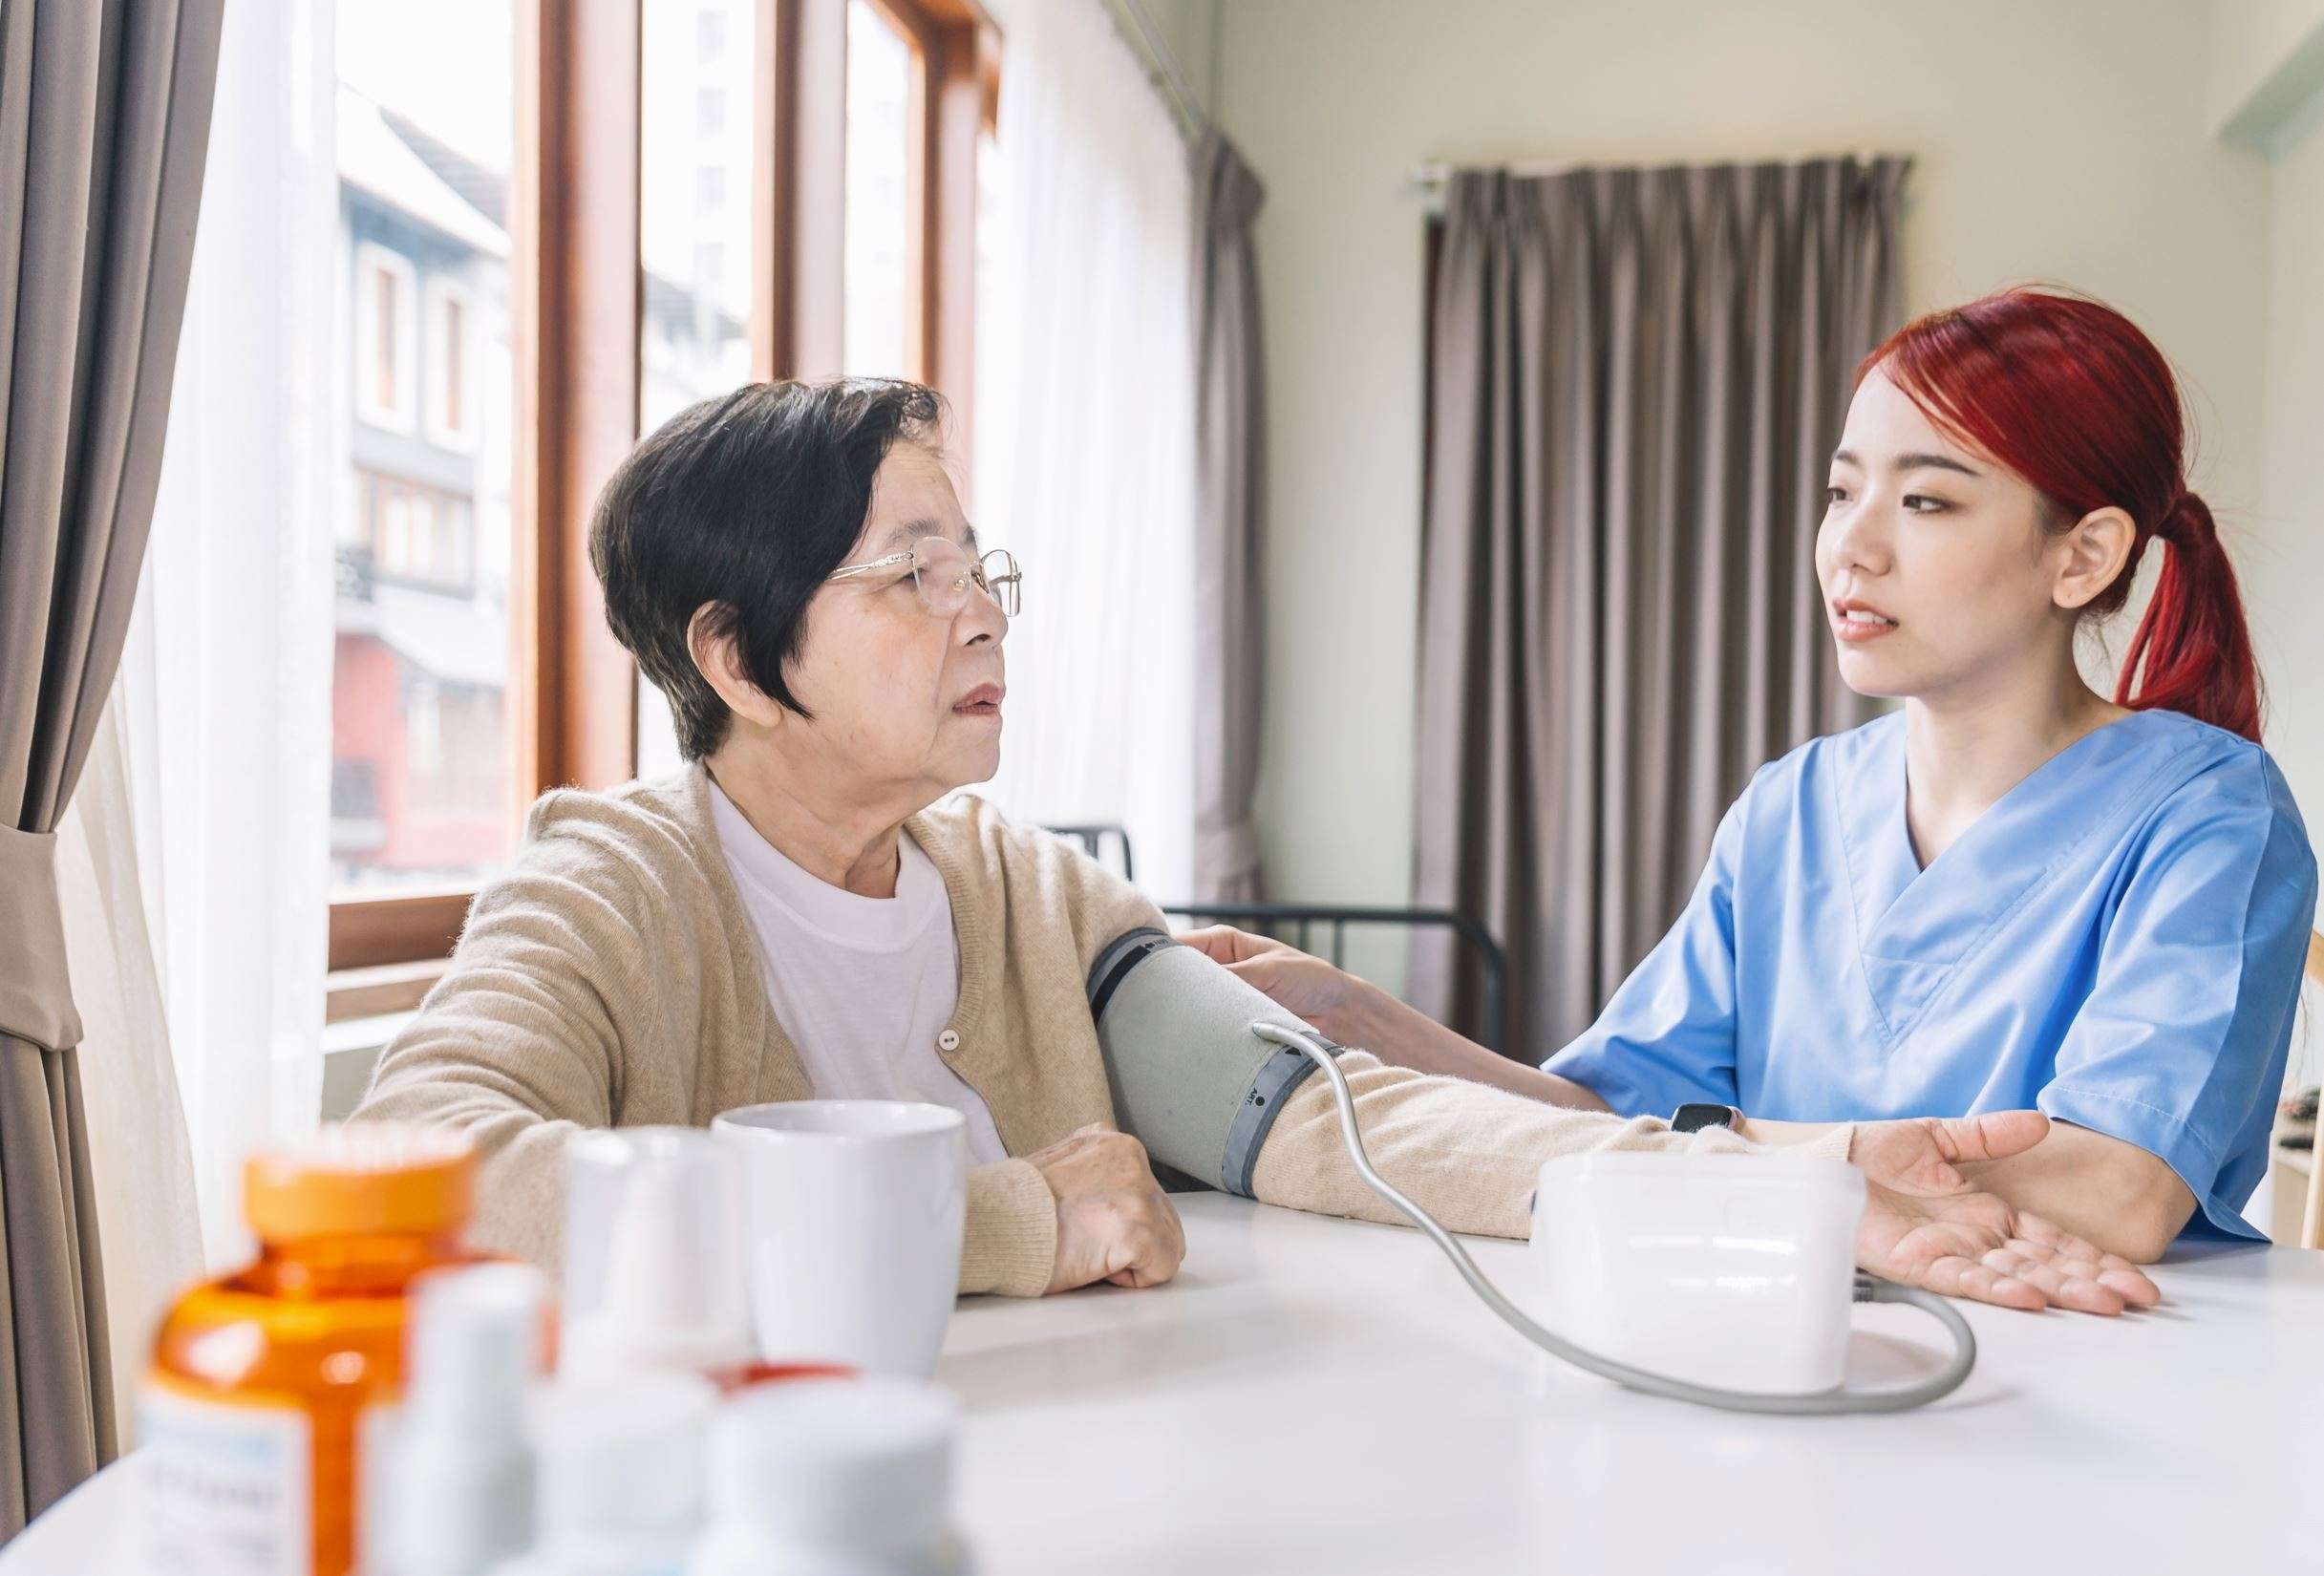 home health aides dos and don'ts - Do Communicate Effectively With Your Coworkers And Managers.